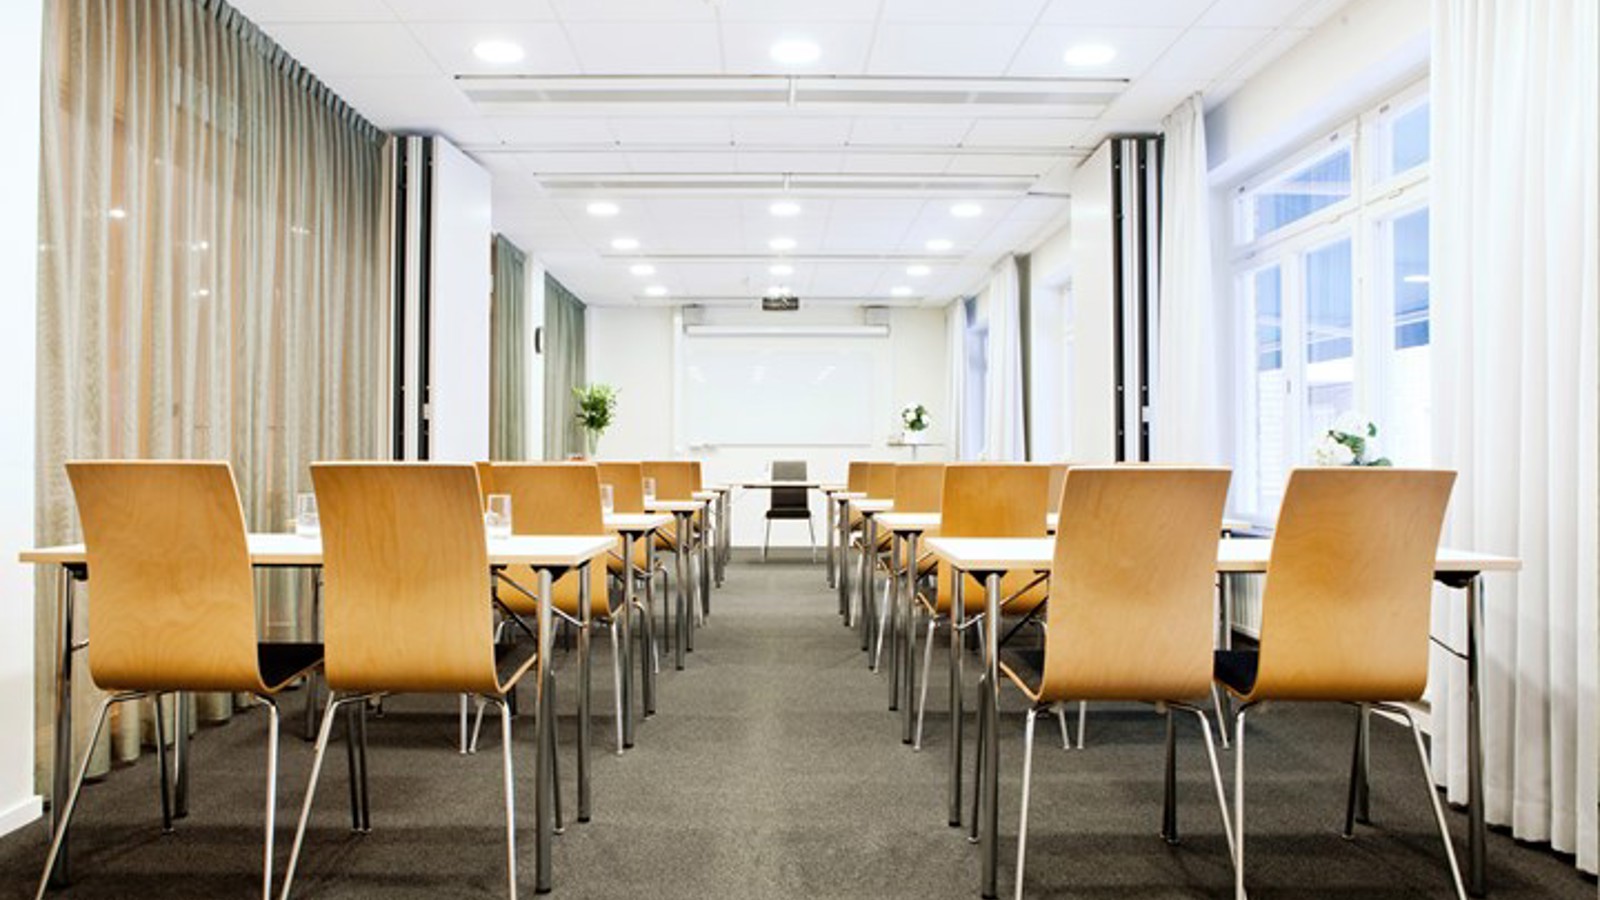 Conference room with school seating, wooden chairs, white walls and large windows